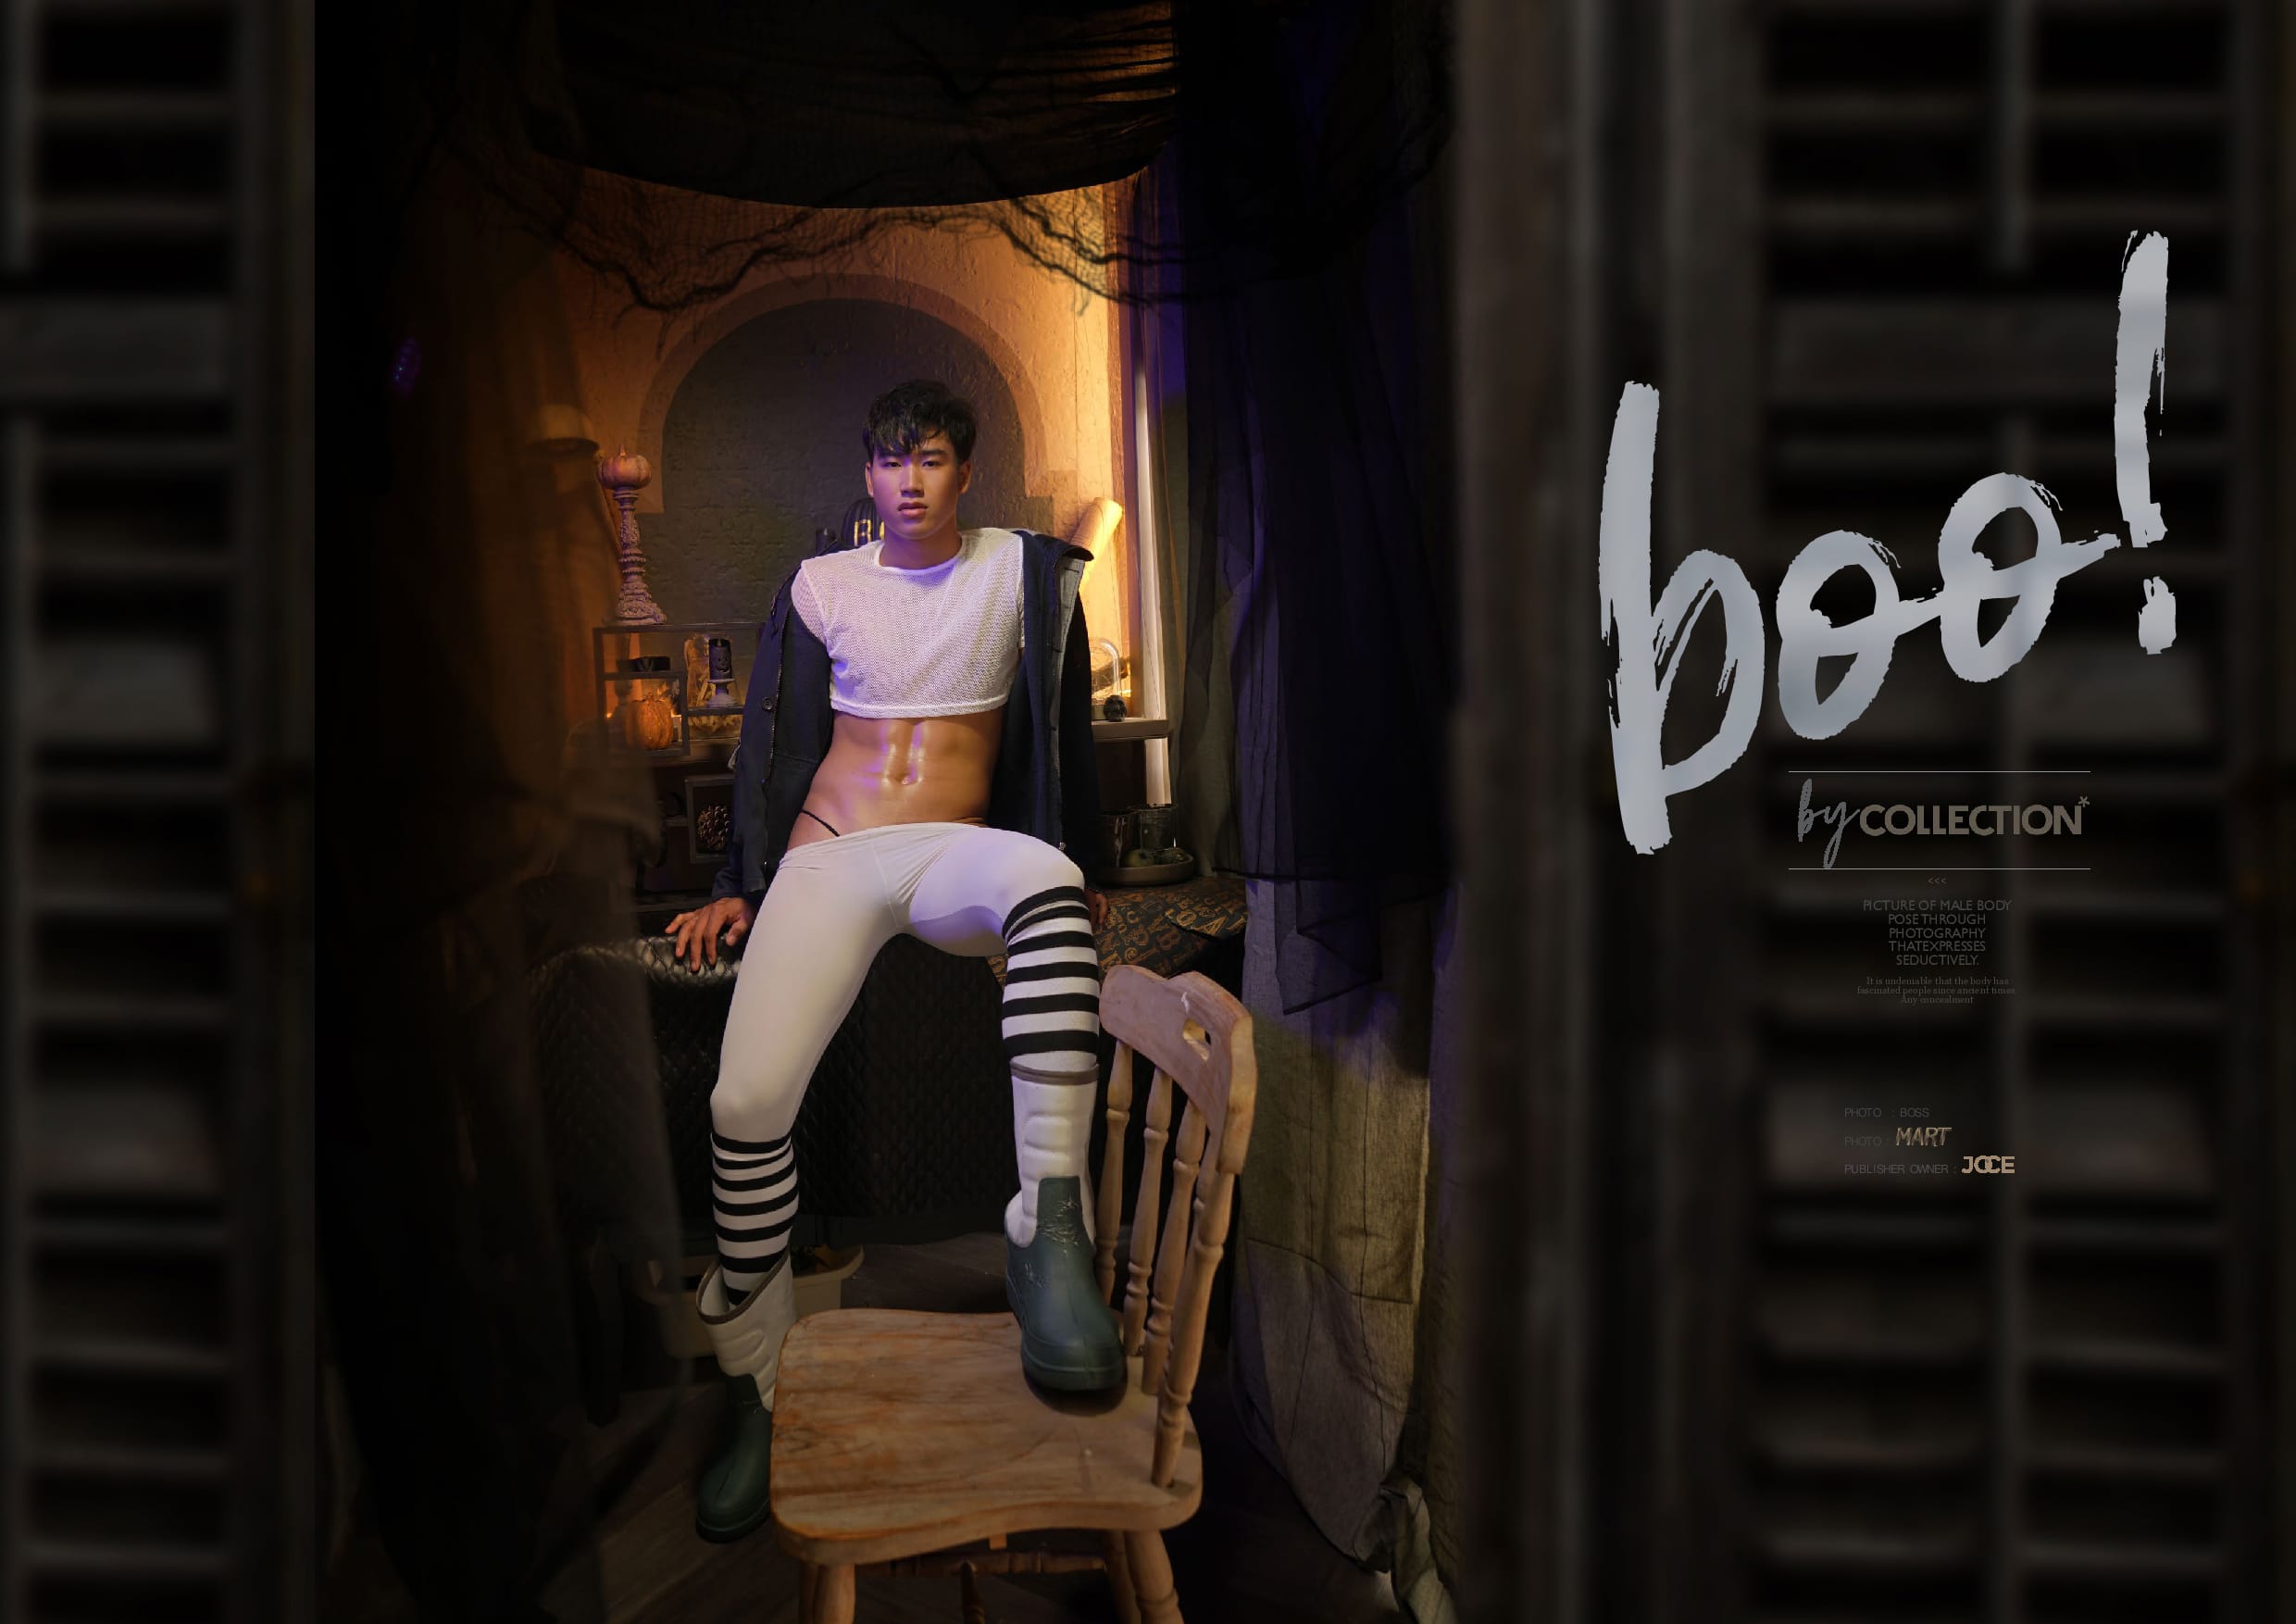 BOO BOSS BY COLLECTION MAGAZINE – HAPPY HALLOWEEN DAY ‖ R+【PHOTO+VIDEO】